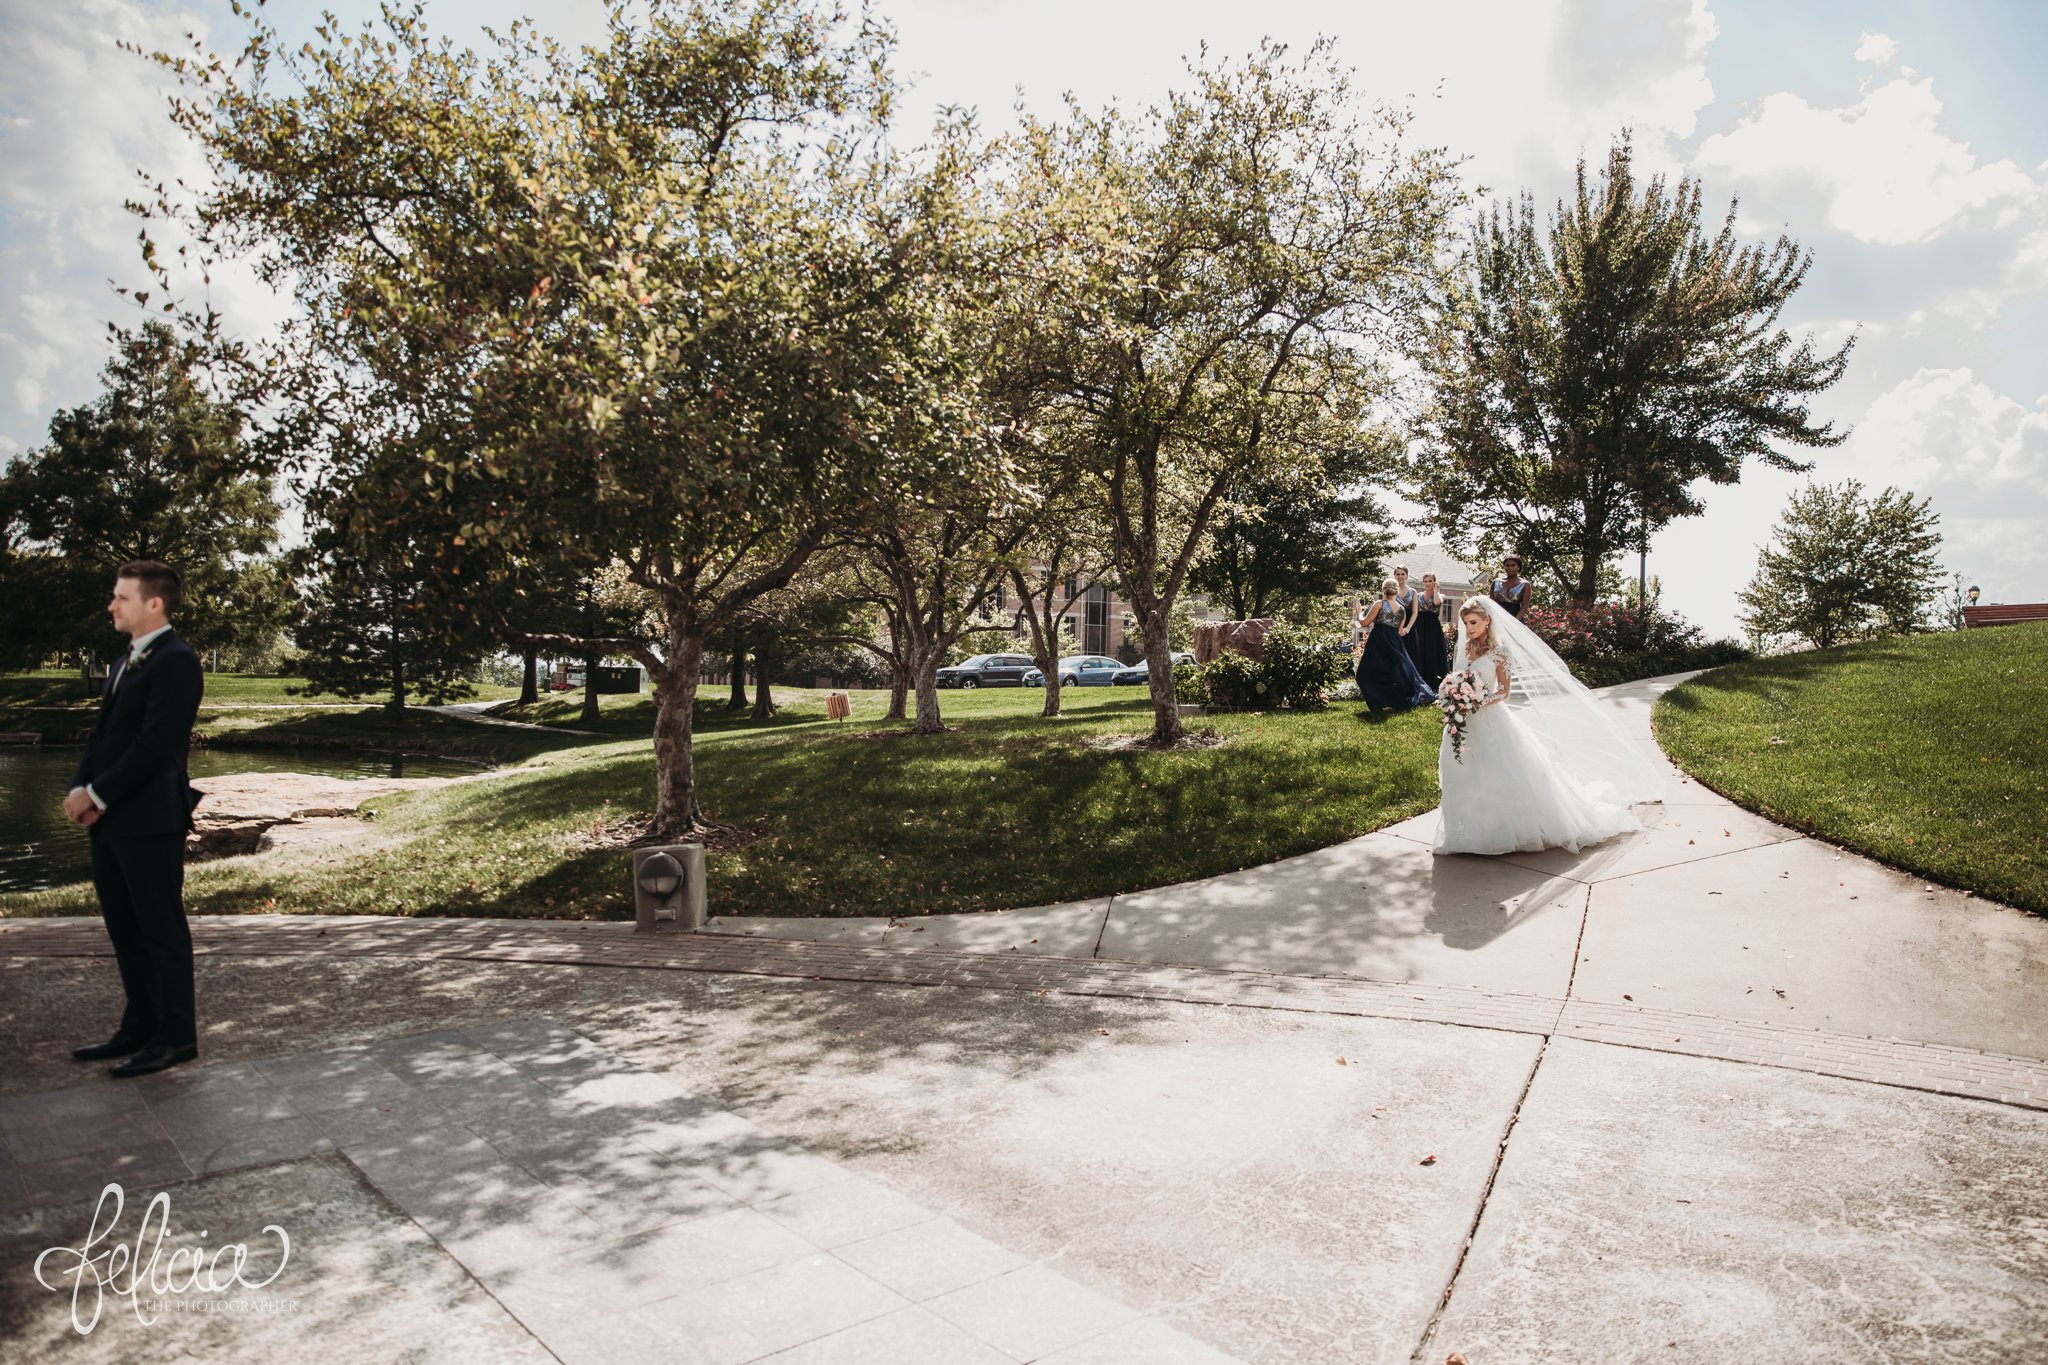 images by feliciathephotographer.com | wedding photographer | kansas city | redemptorist | classic | first look | trees | whimsical | waiting for the bride | lace veil | romantic | 